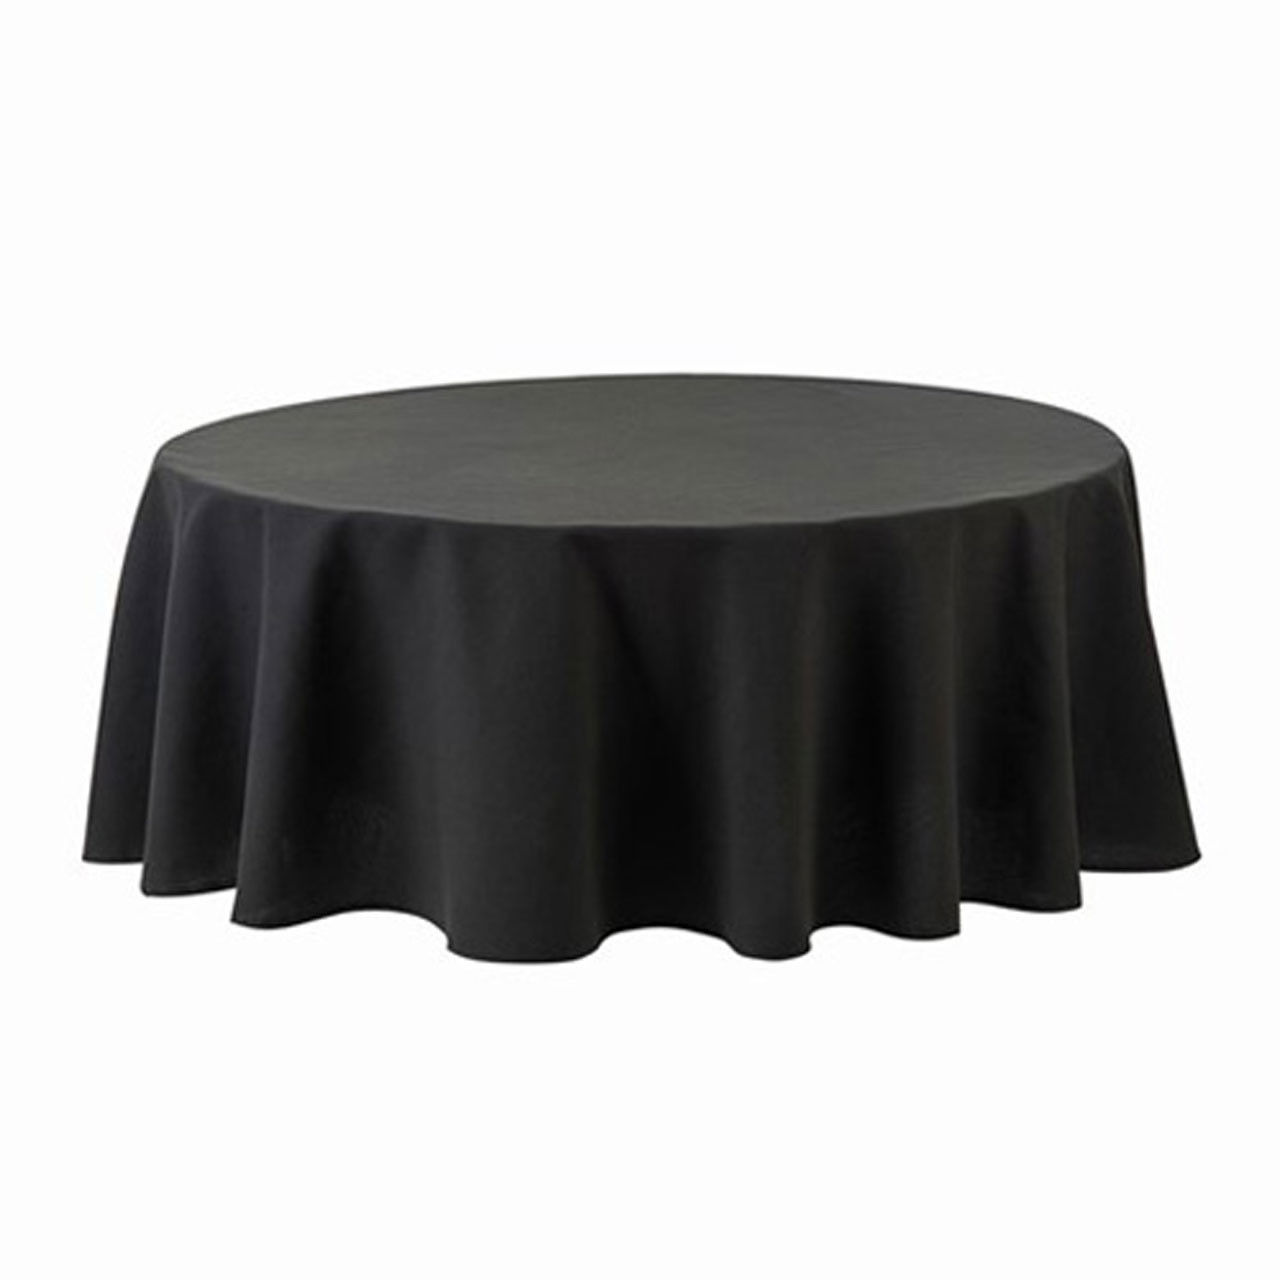 Is this black round tablecloth suitable for a restaurant?